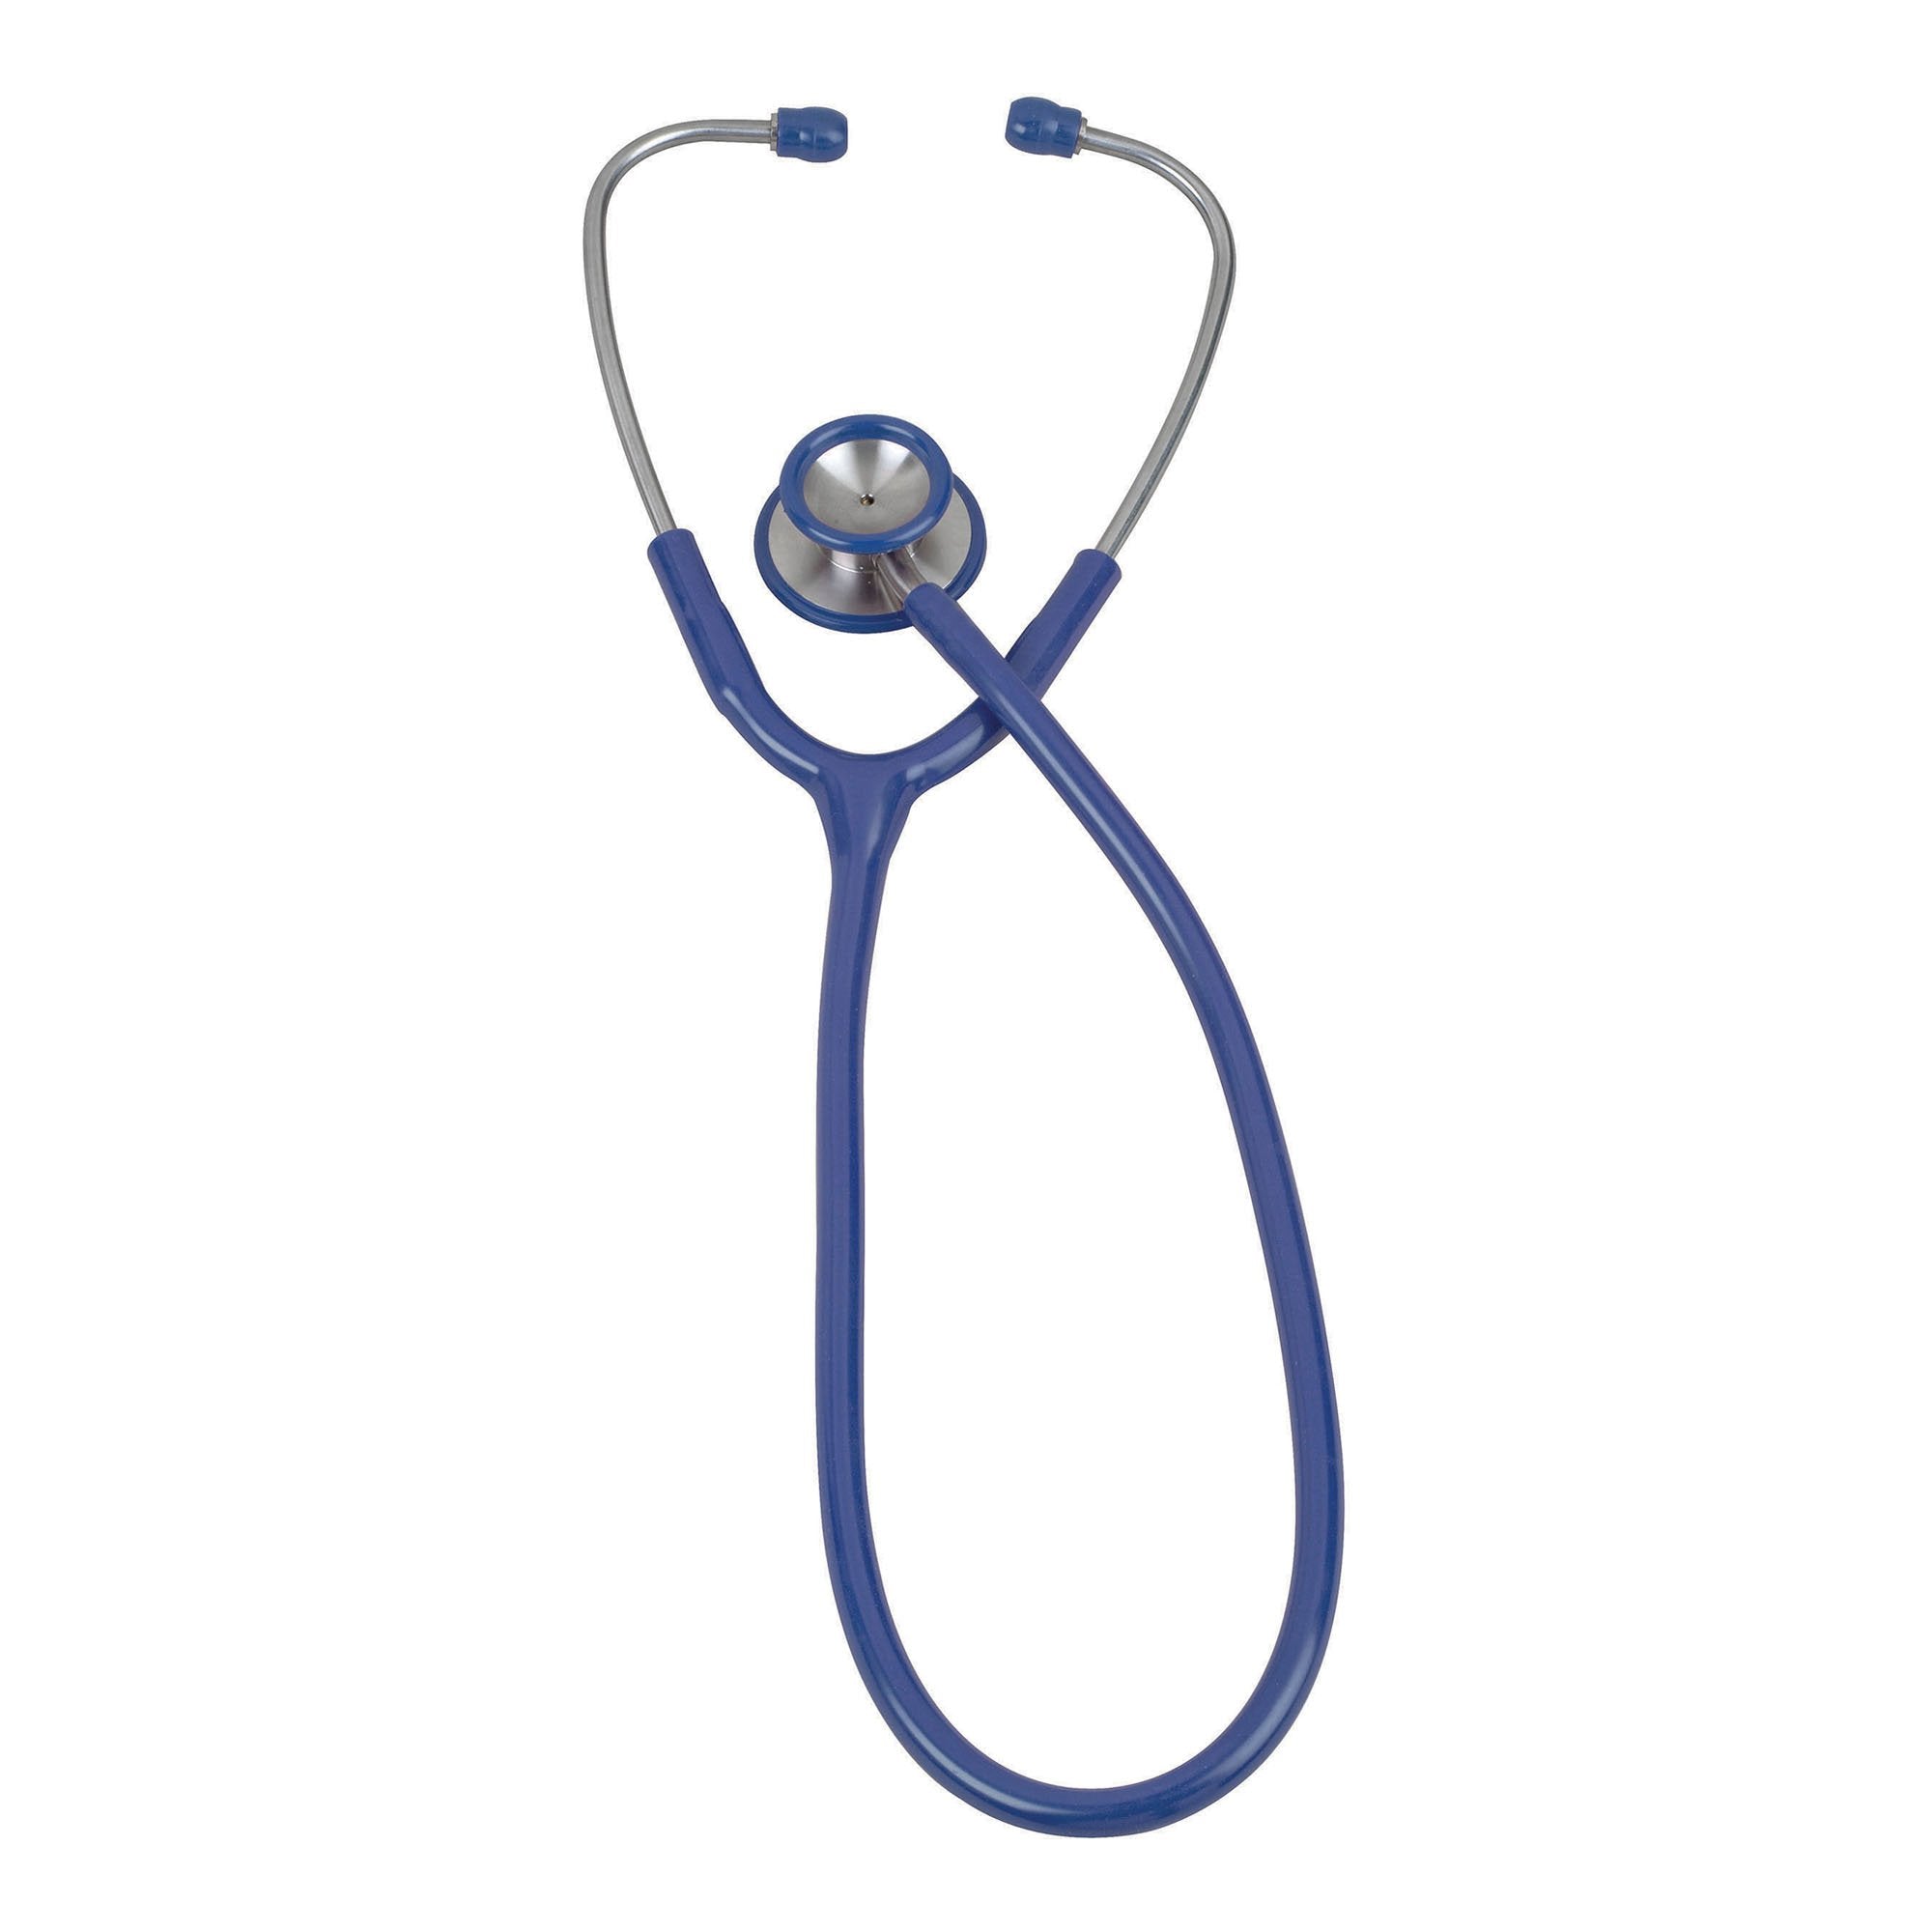 Classic Stethoscope Veridian Blue 1-Tube 25 Inch Tube Double-Sided Chestpiece